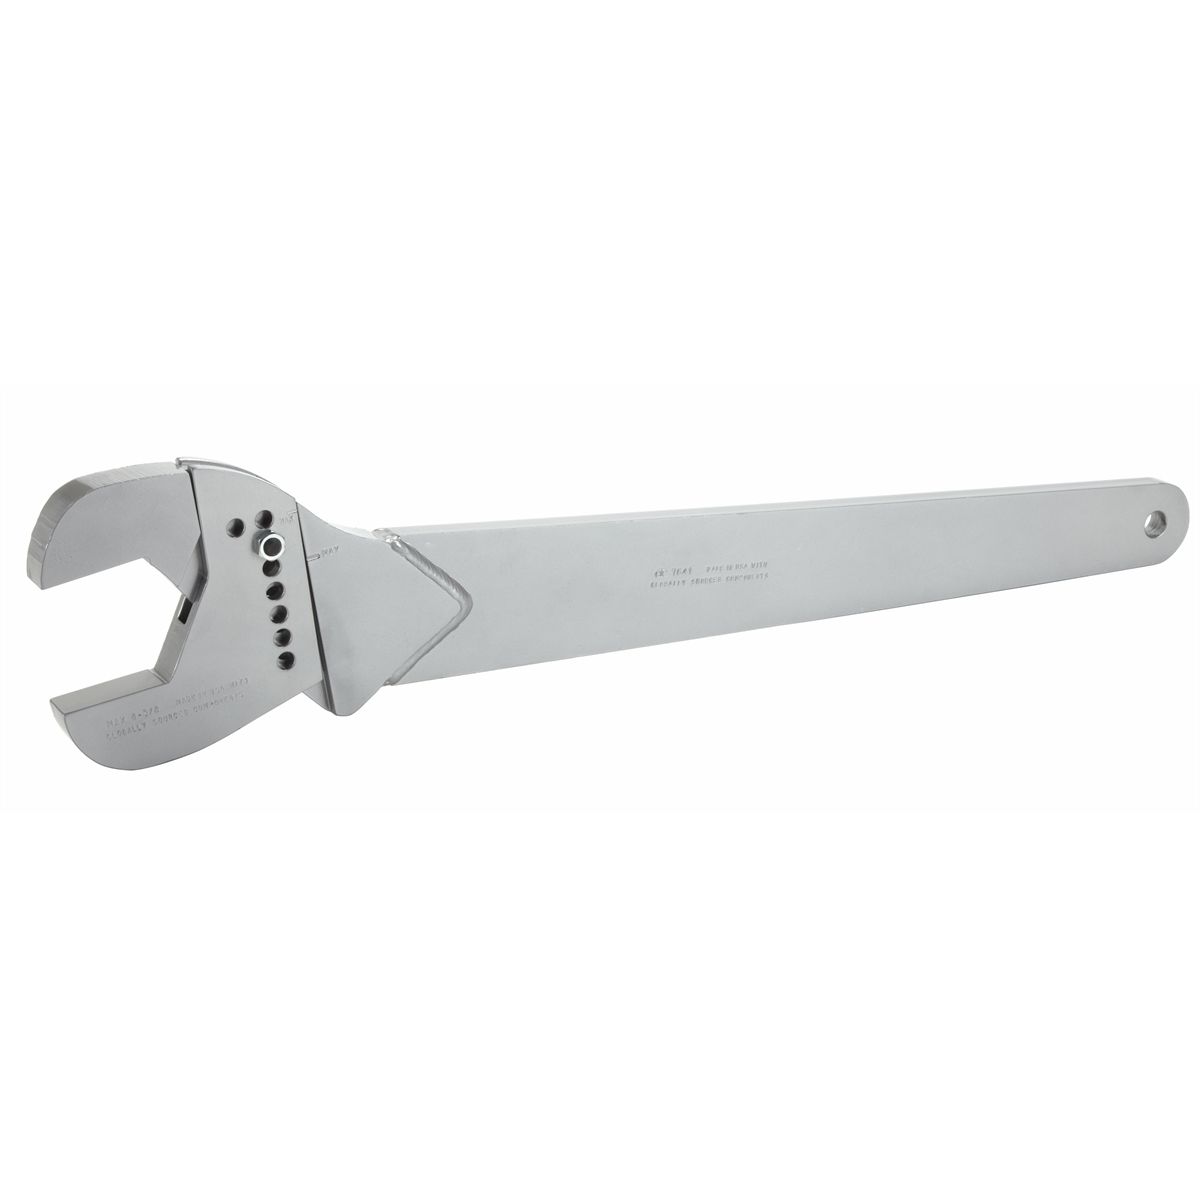 Adjustable Wrench - 2 3/4 - 4 3/4 In Nut / Bolt Size